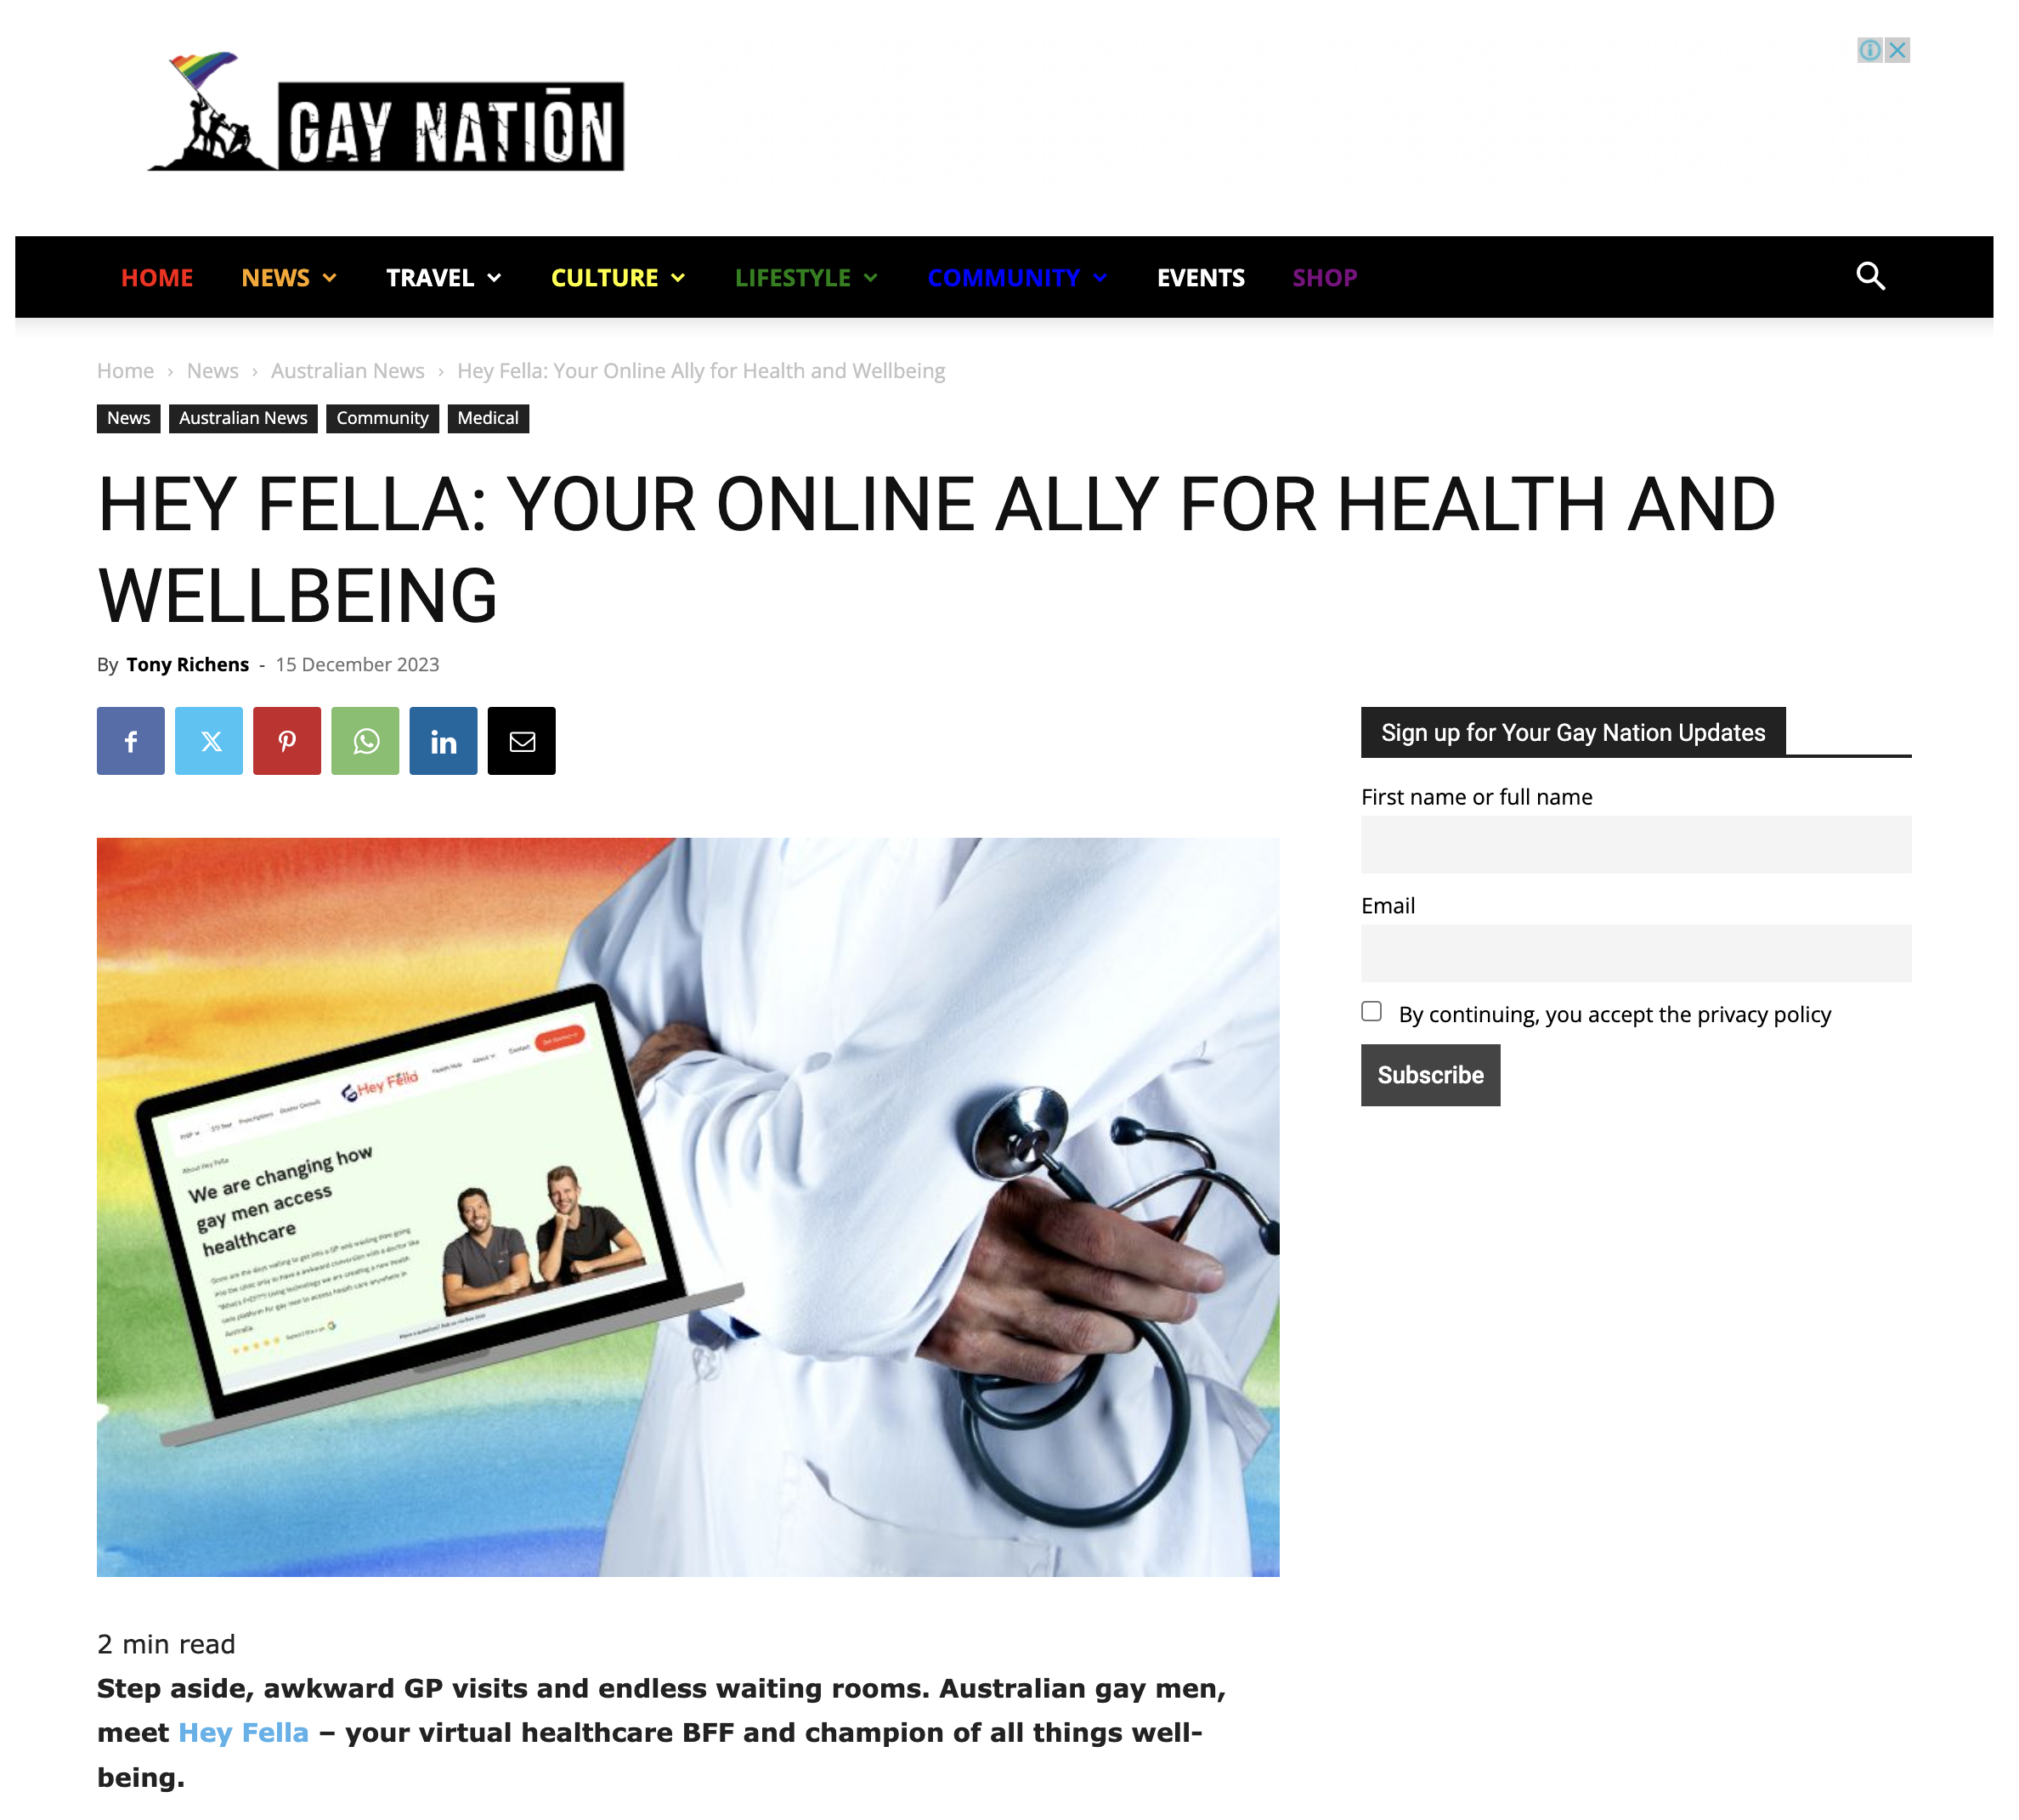 Your online ally for health & wellbeing